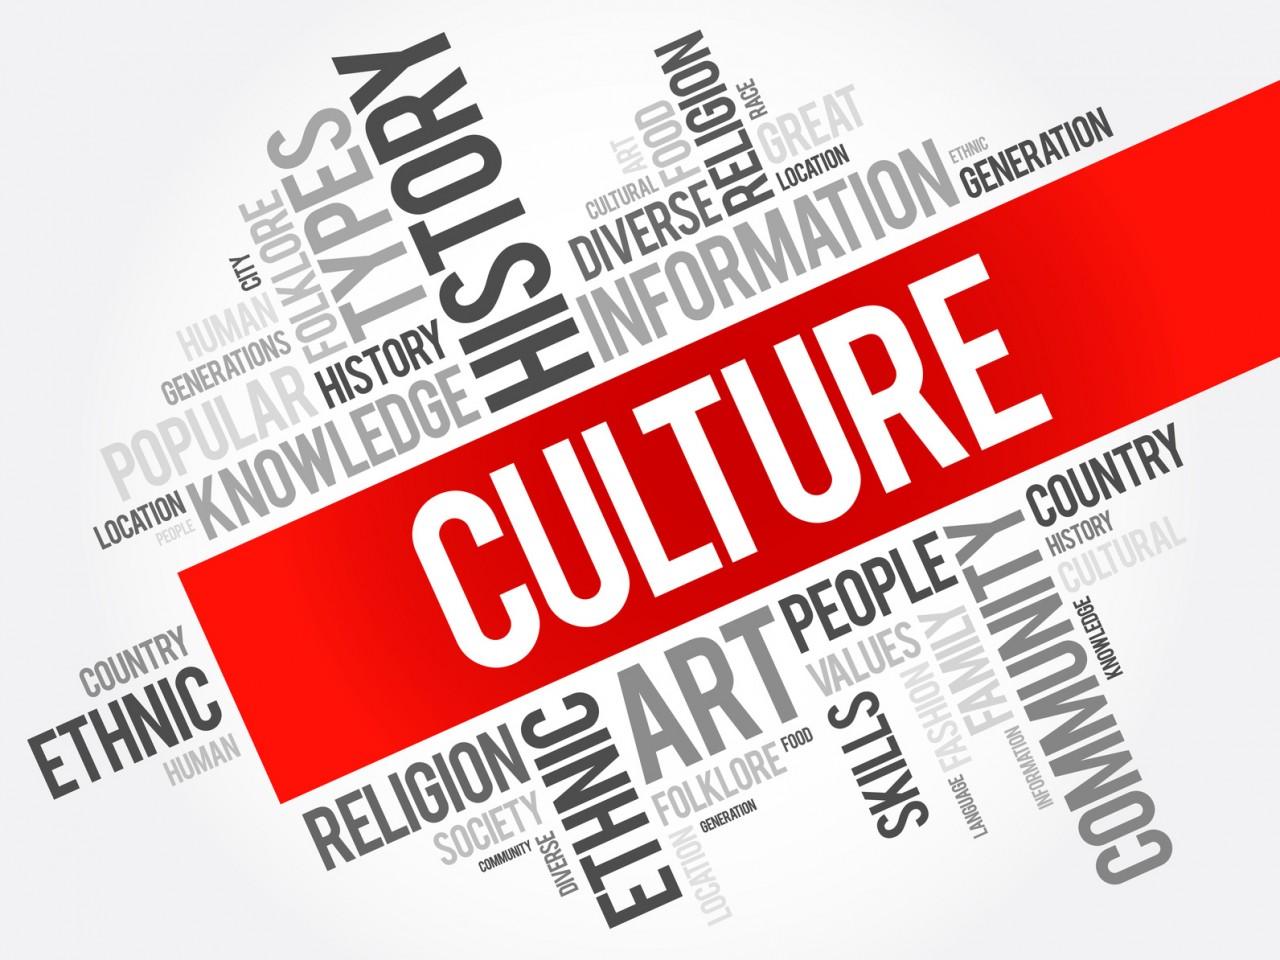 Why is Cultural Awareness Important?